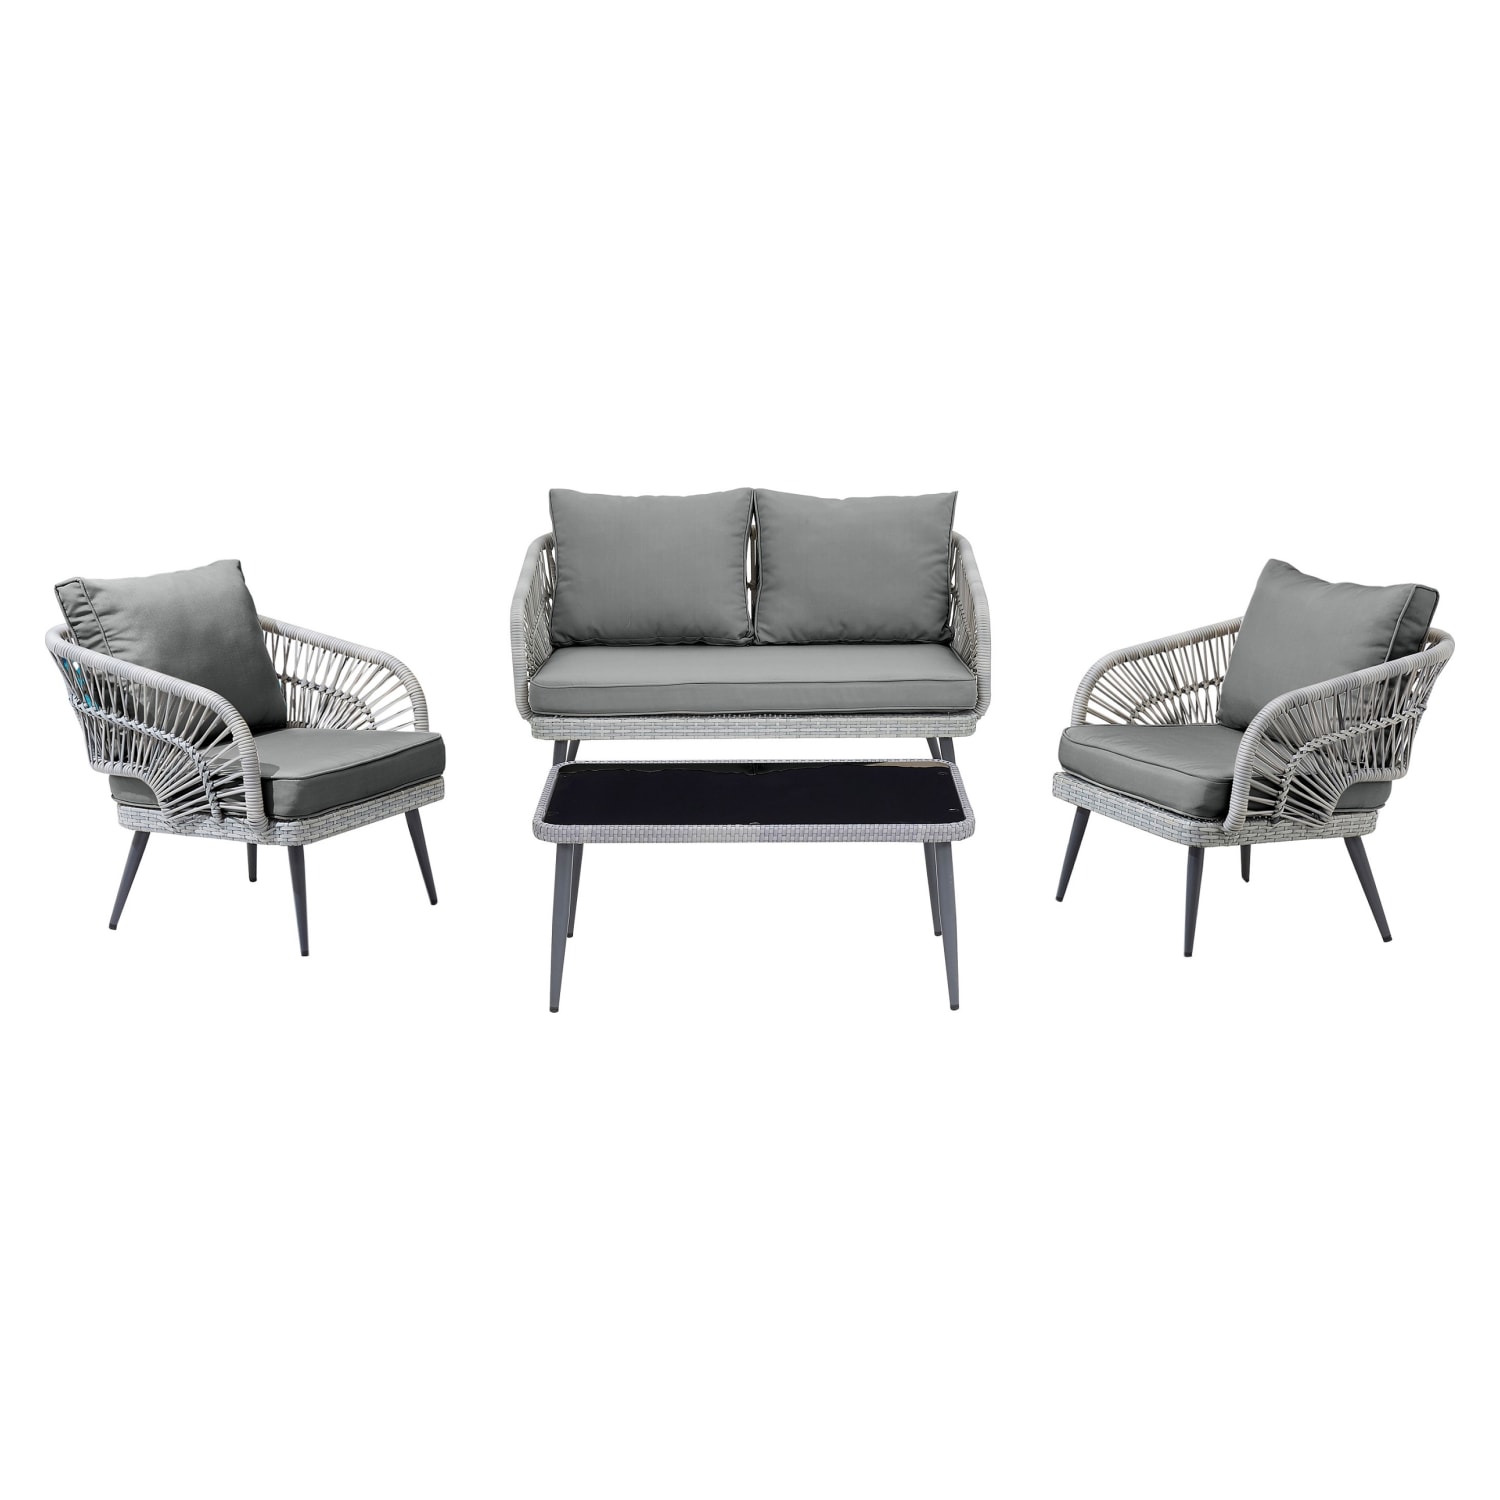 Riviera Rope Wicker 4-Piece 4 Seater Patio Conversation Set with Cushions in Gray